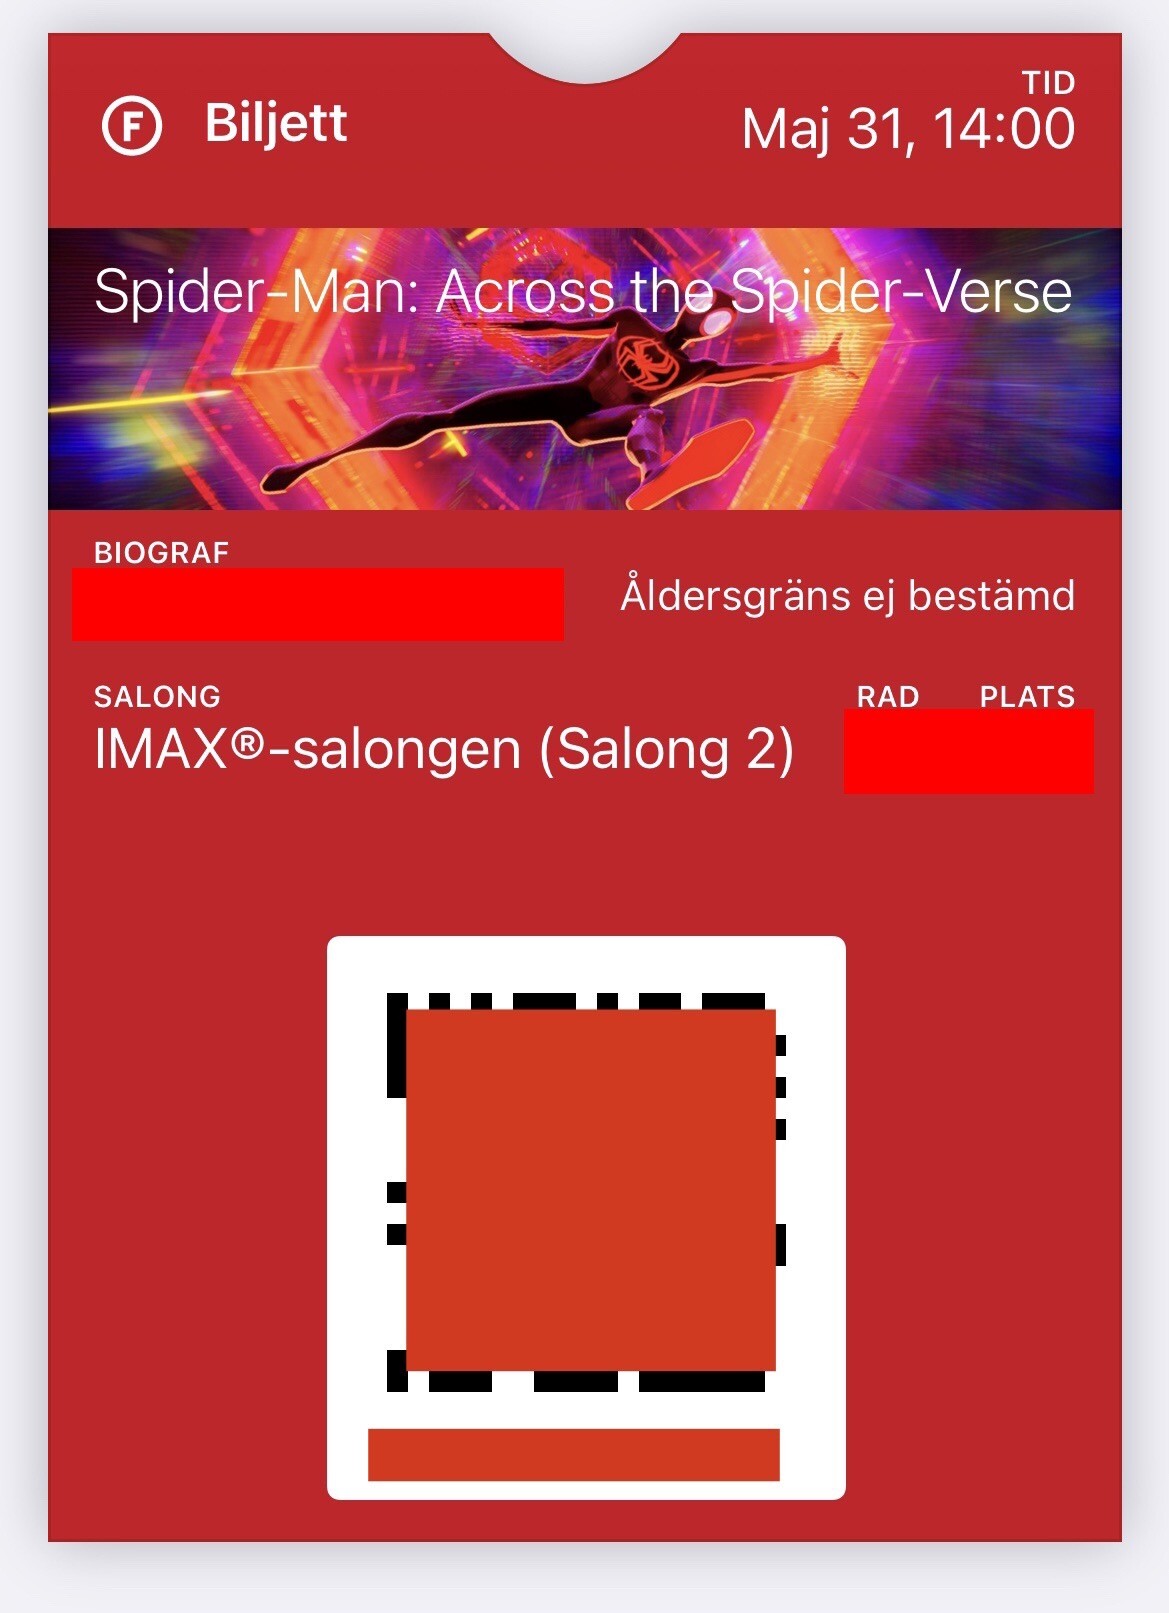 Screenshot of an Apple Wallet ticket for Spider-Man: Across the Spider-Verse (with any compromising information obscured). The text on the ticket is in Swedish.